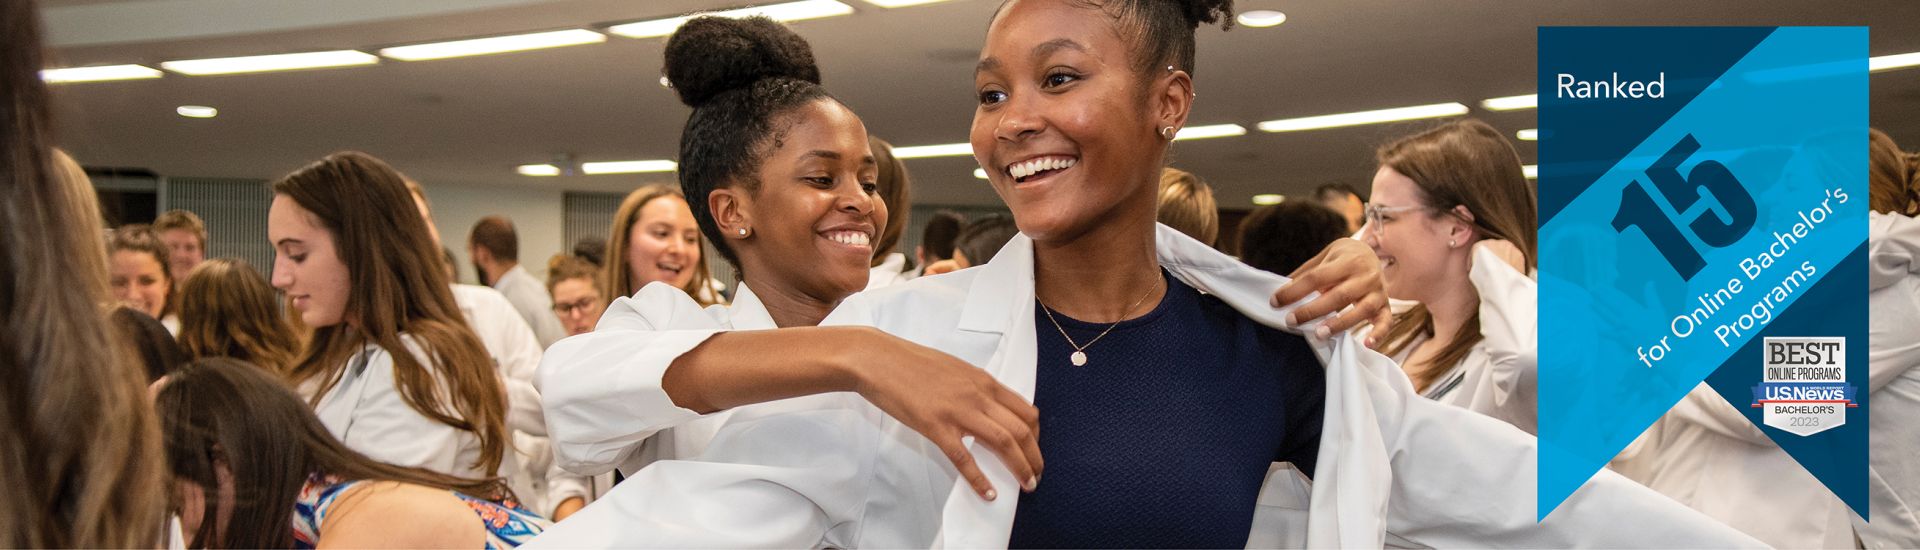 a student putting a white coat on another student | banner that reads Ranked 15 for online bachelor's programs, with the USNWR badge